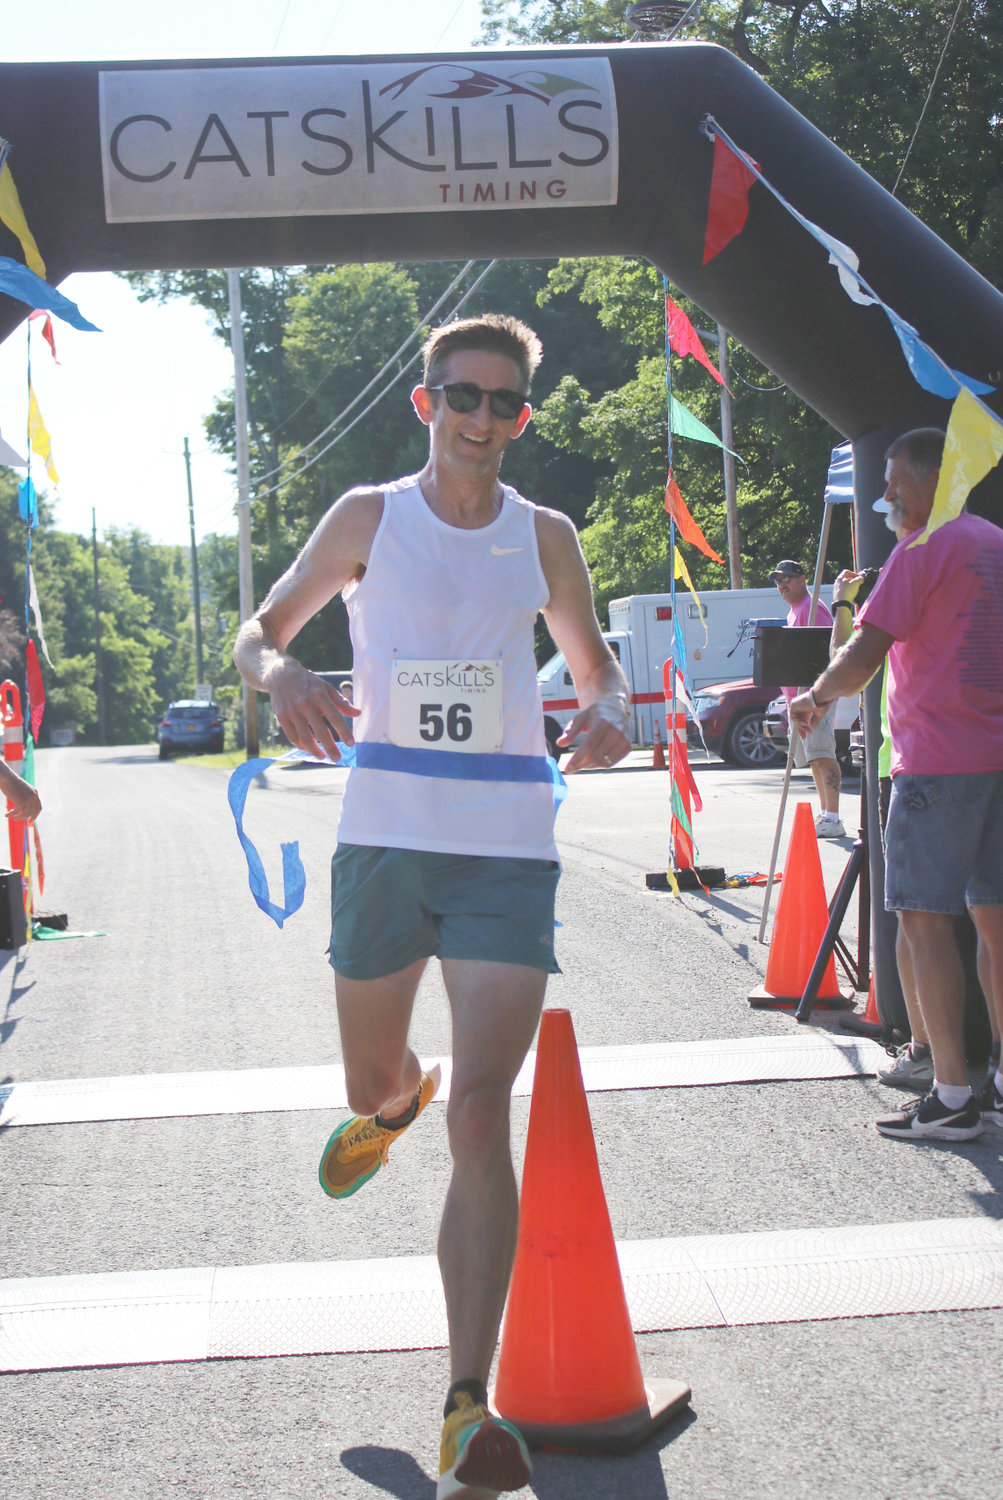 Scott Roth from Lancaster, PA was the first 10K runner to cross with a time of 36.08.